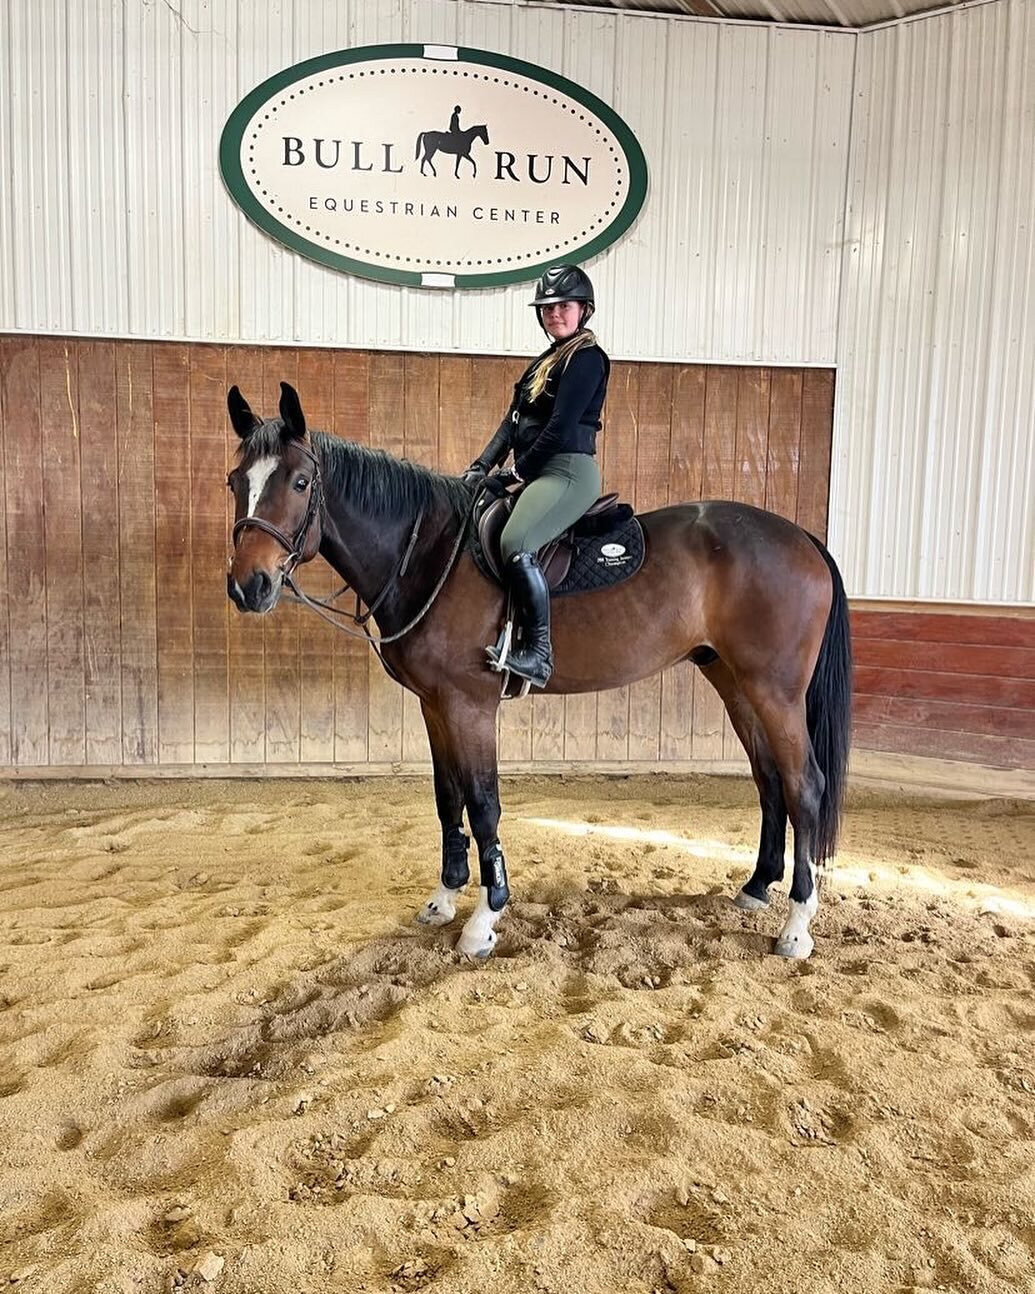 Huge Congratulations to Abby on her new horse Strike!! We are so excited to see this pair in action 🤩🤩